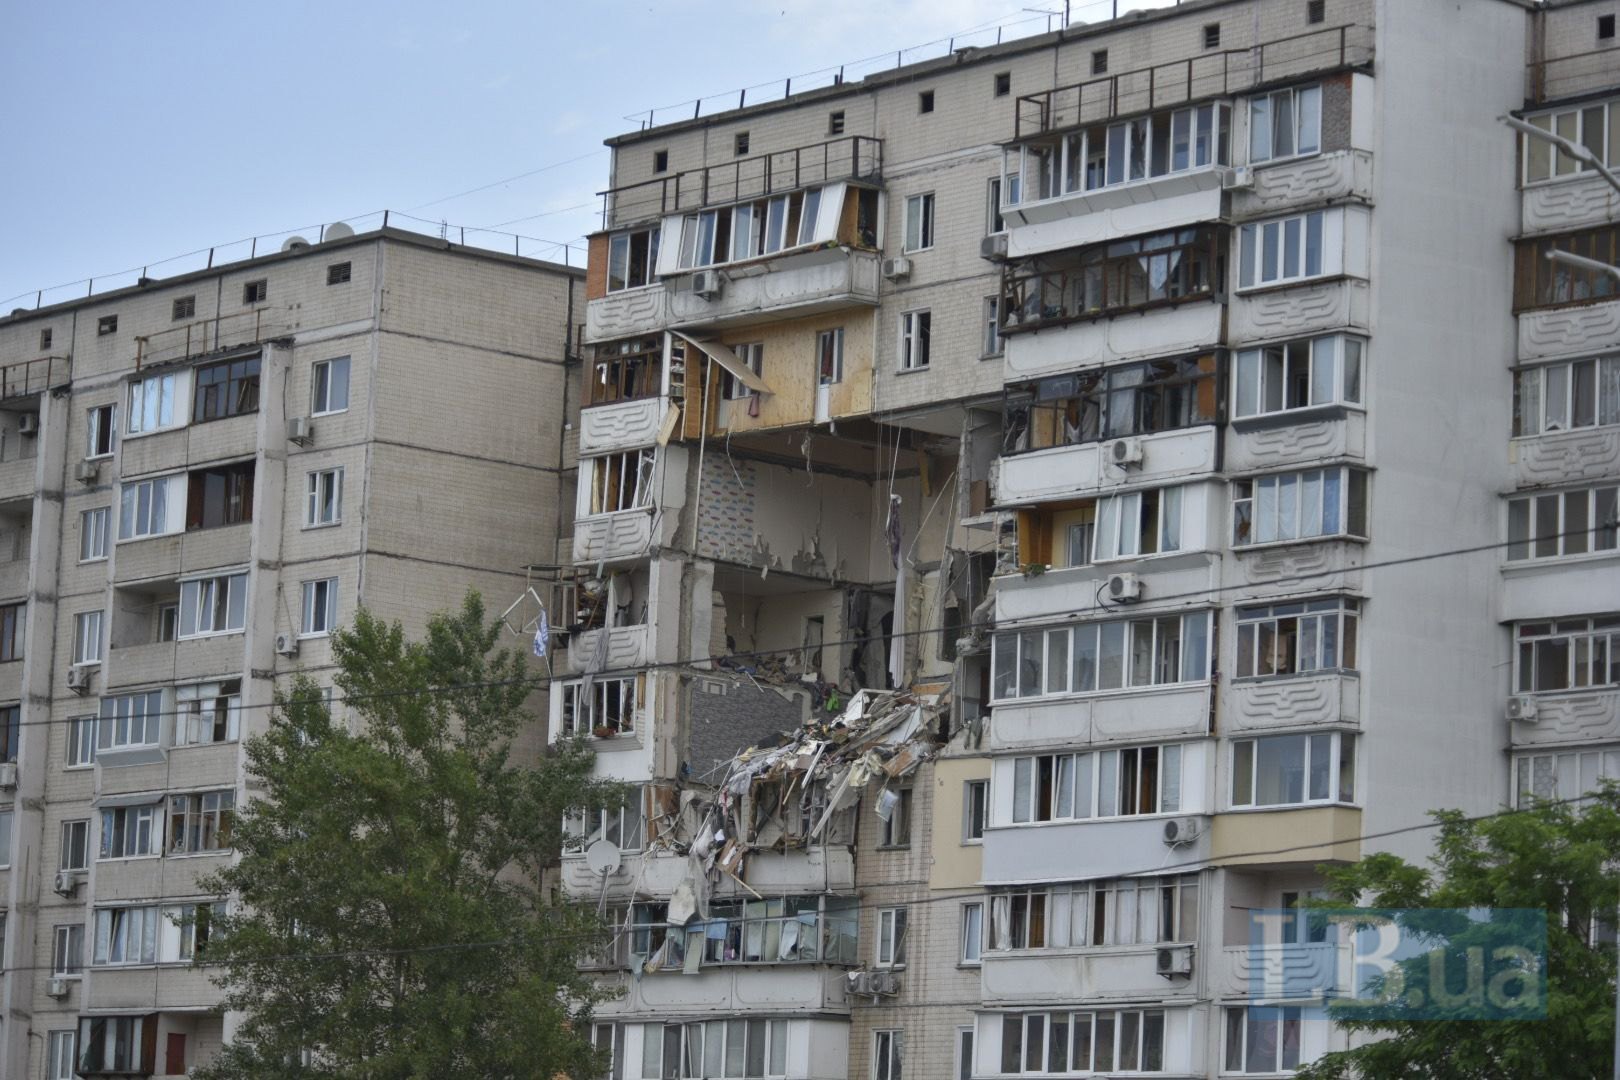 The aftermath of a gas explosion in a high-rise building in Poznyaky, Kyiv 